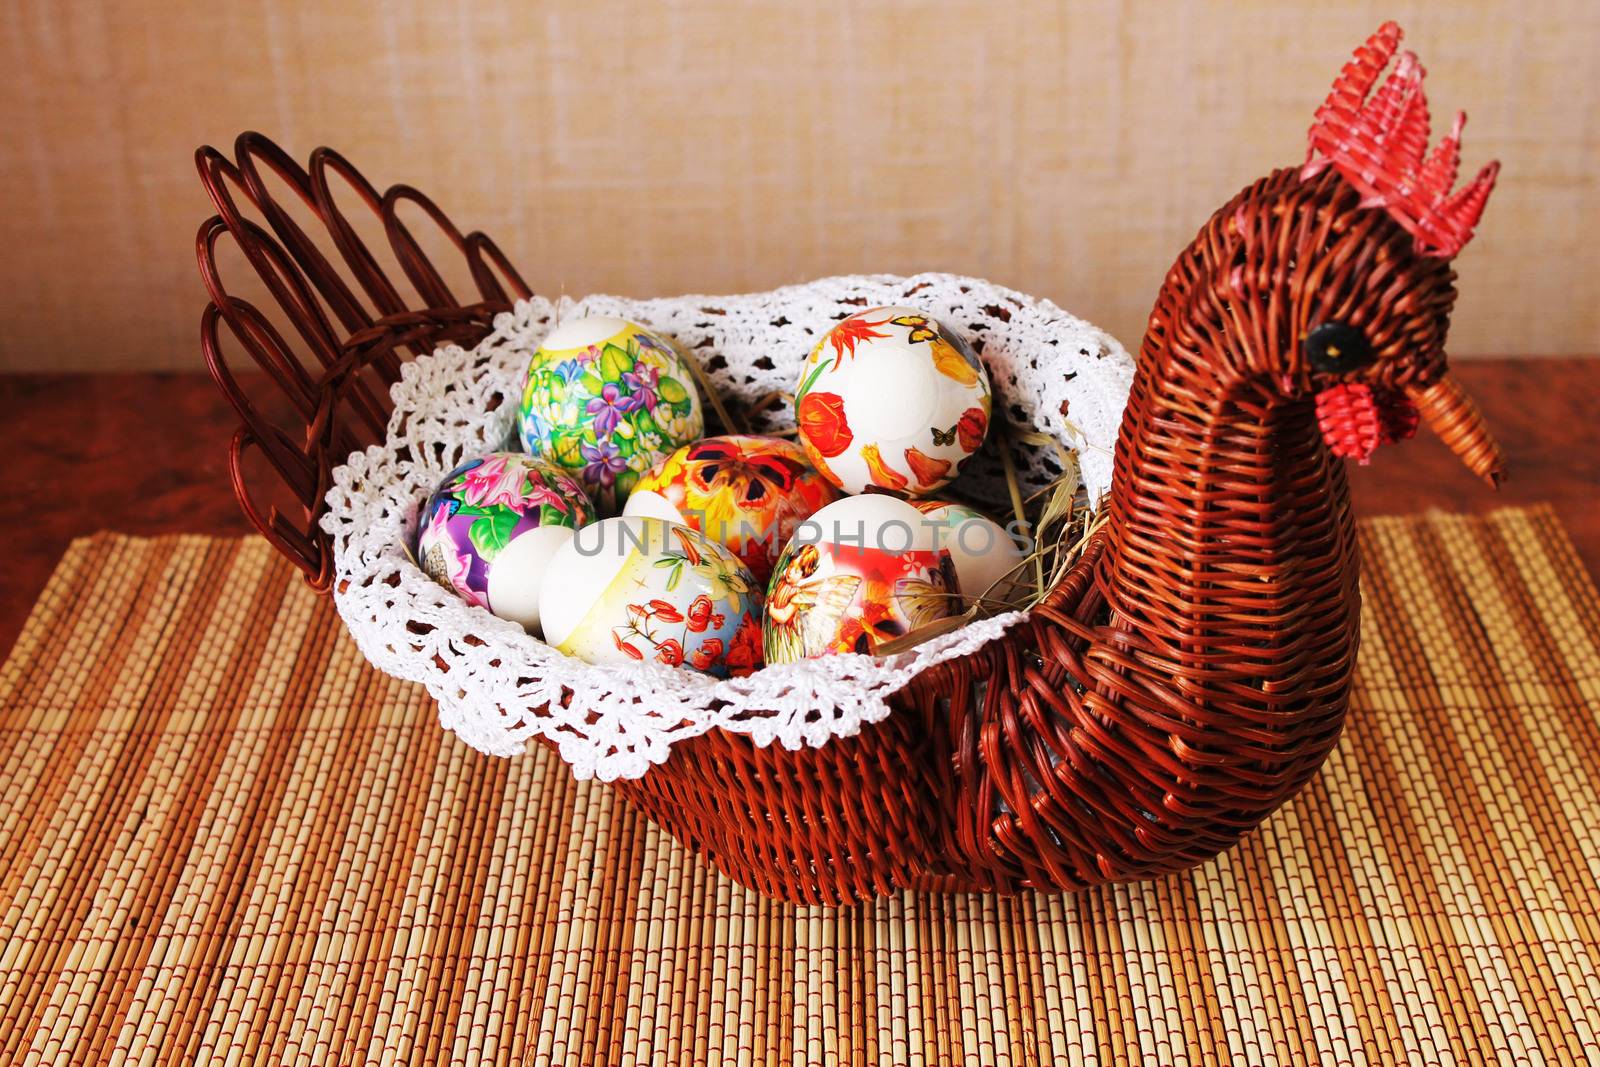 Decorative wicker vase in the form of chicken with Easter eggs inside